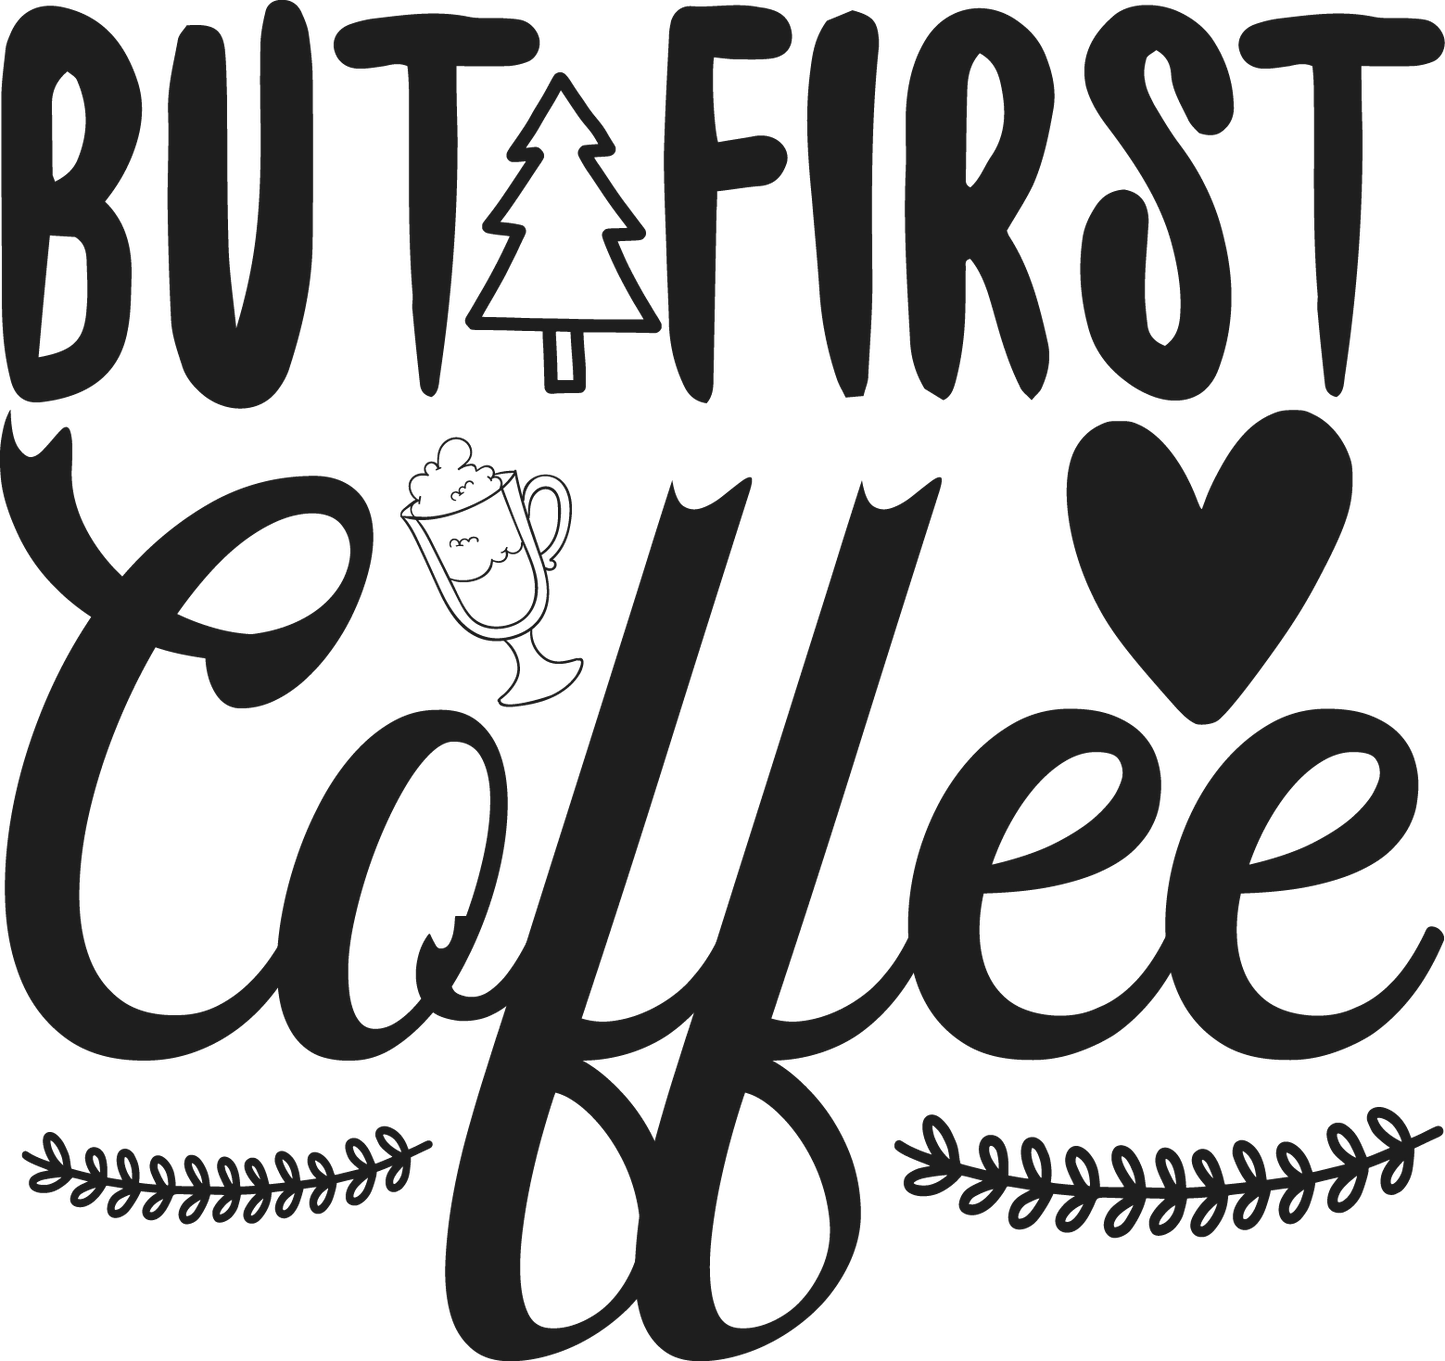 Coffee First Coffee Mug - Home of Buy 3, Get 1 Free. Long Lasting Custom Designed Coffee Mugs for Business and Pleasure. Perfect for Christmas, Housewarming, Wedding Party gifts